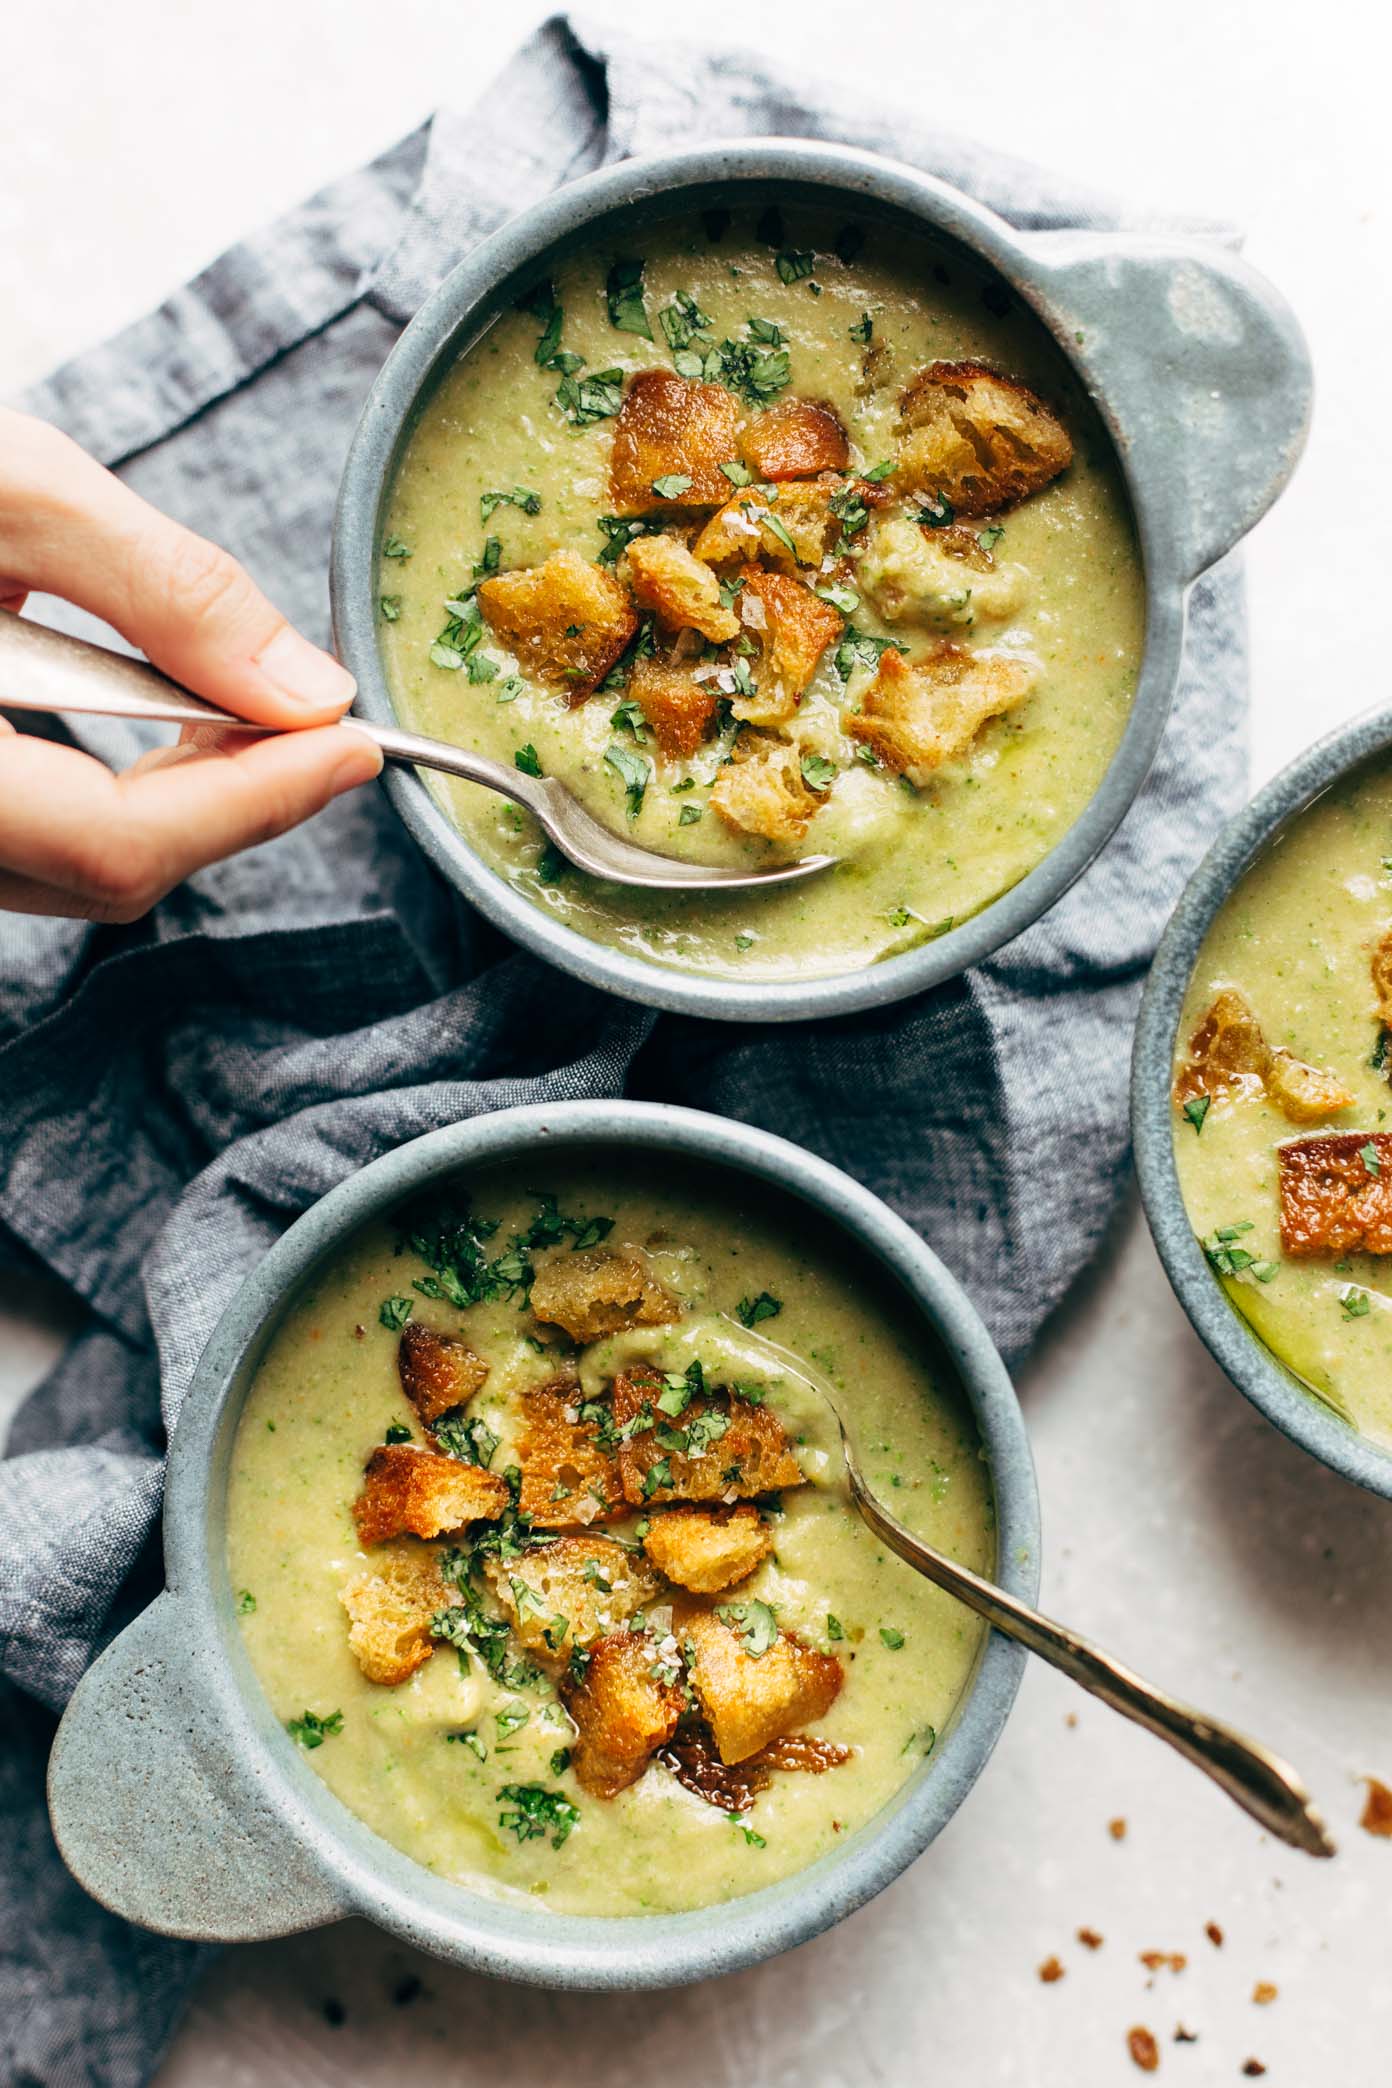 THE BEST detox broccoli cheese soup has silky smooth texture and classic broccoli cheese flavor with exactly zero ingredients out of a can. Real food meets comfort food. vegan / gluten free / vegetarian. | pinchofyum.com